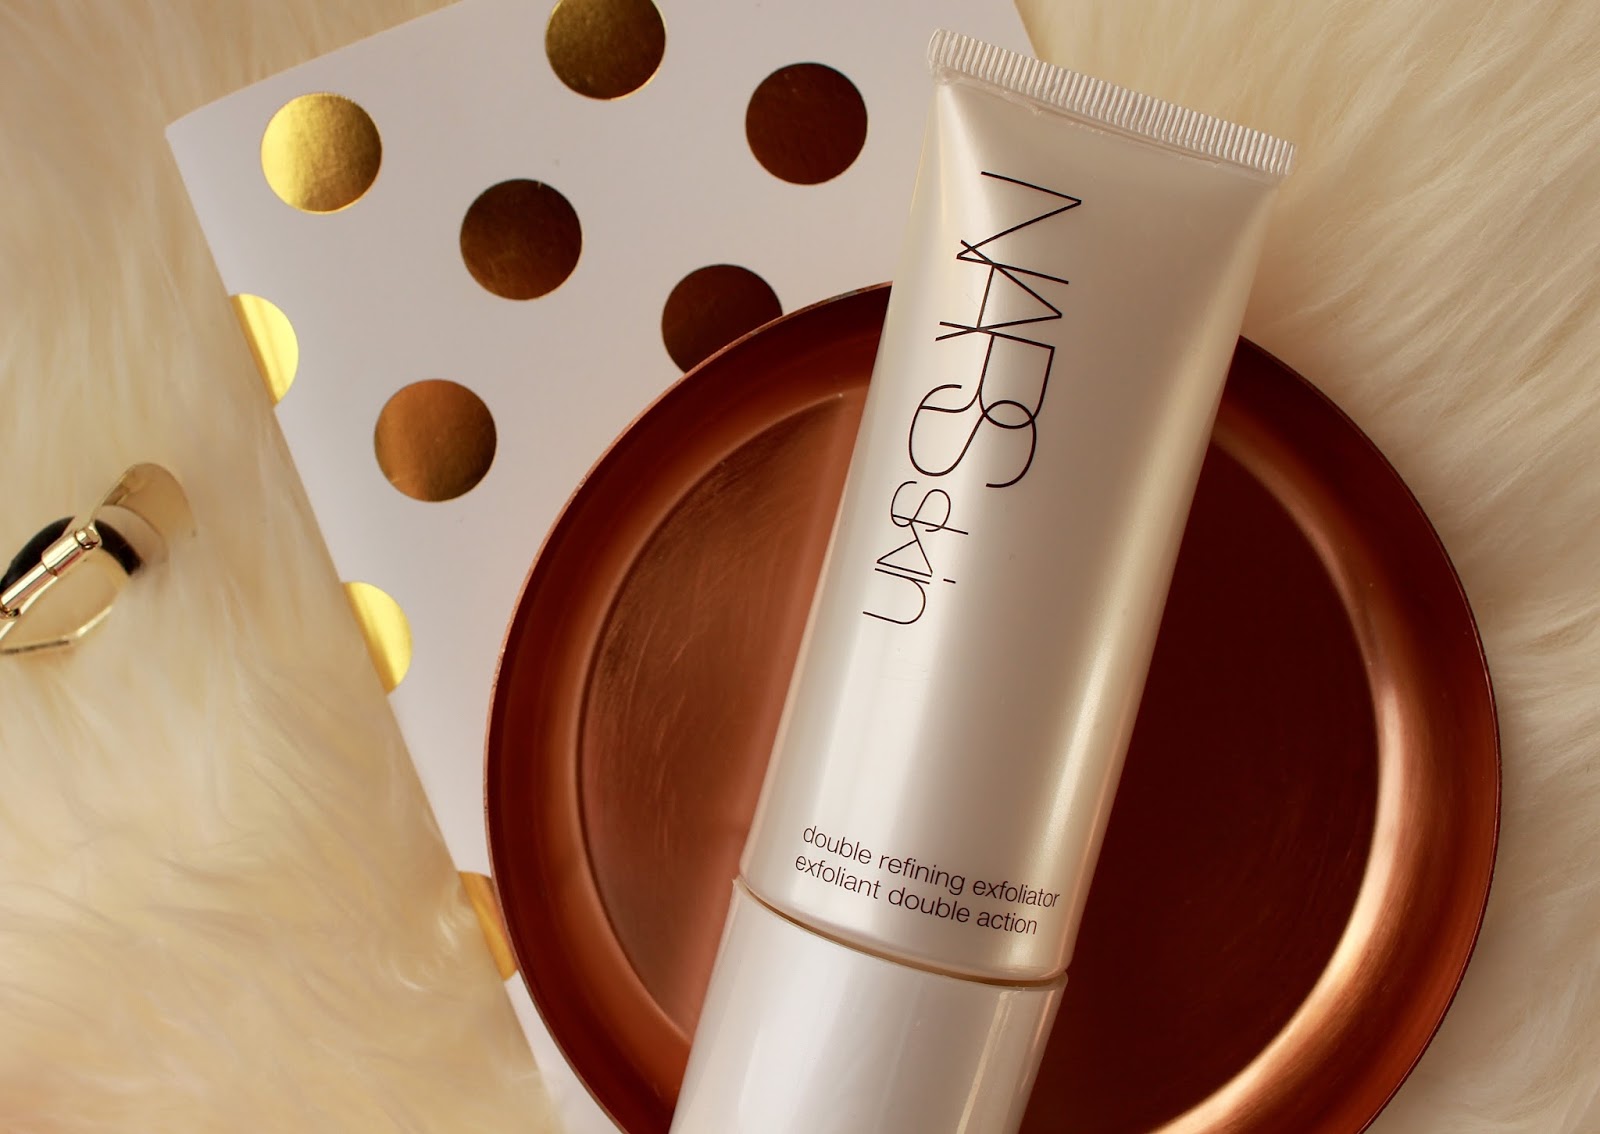 NARS DOUBLE REFINING EXFOLIATOR, Beauty Review, Nars Skincare Review, ASOS Beauty